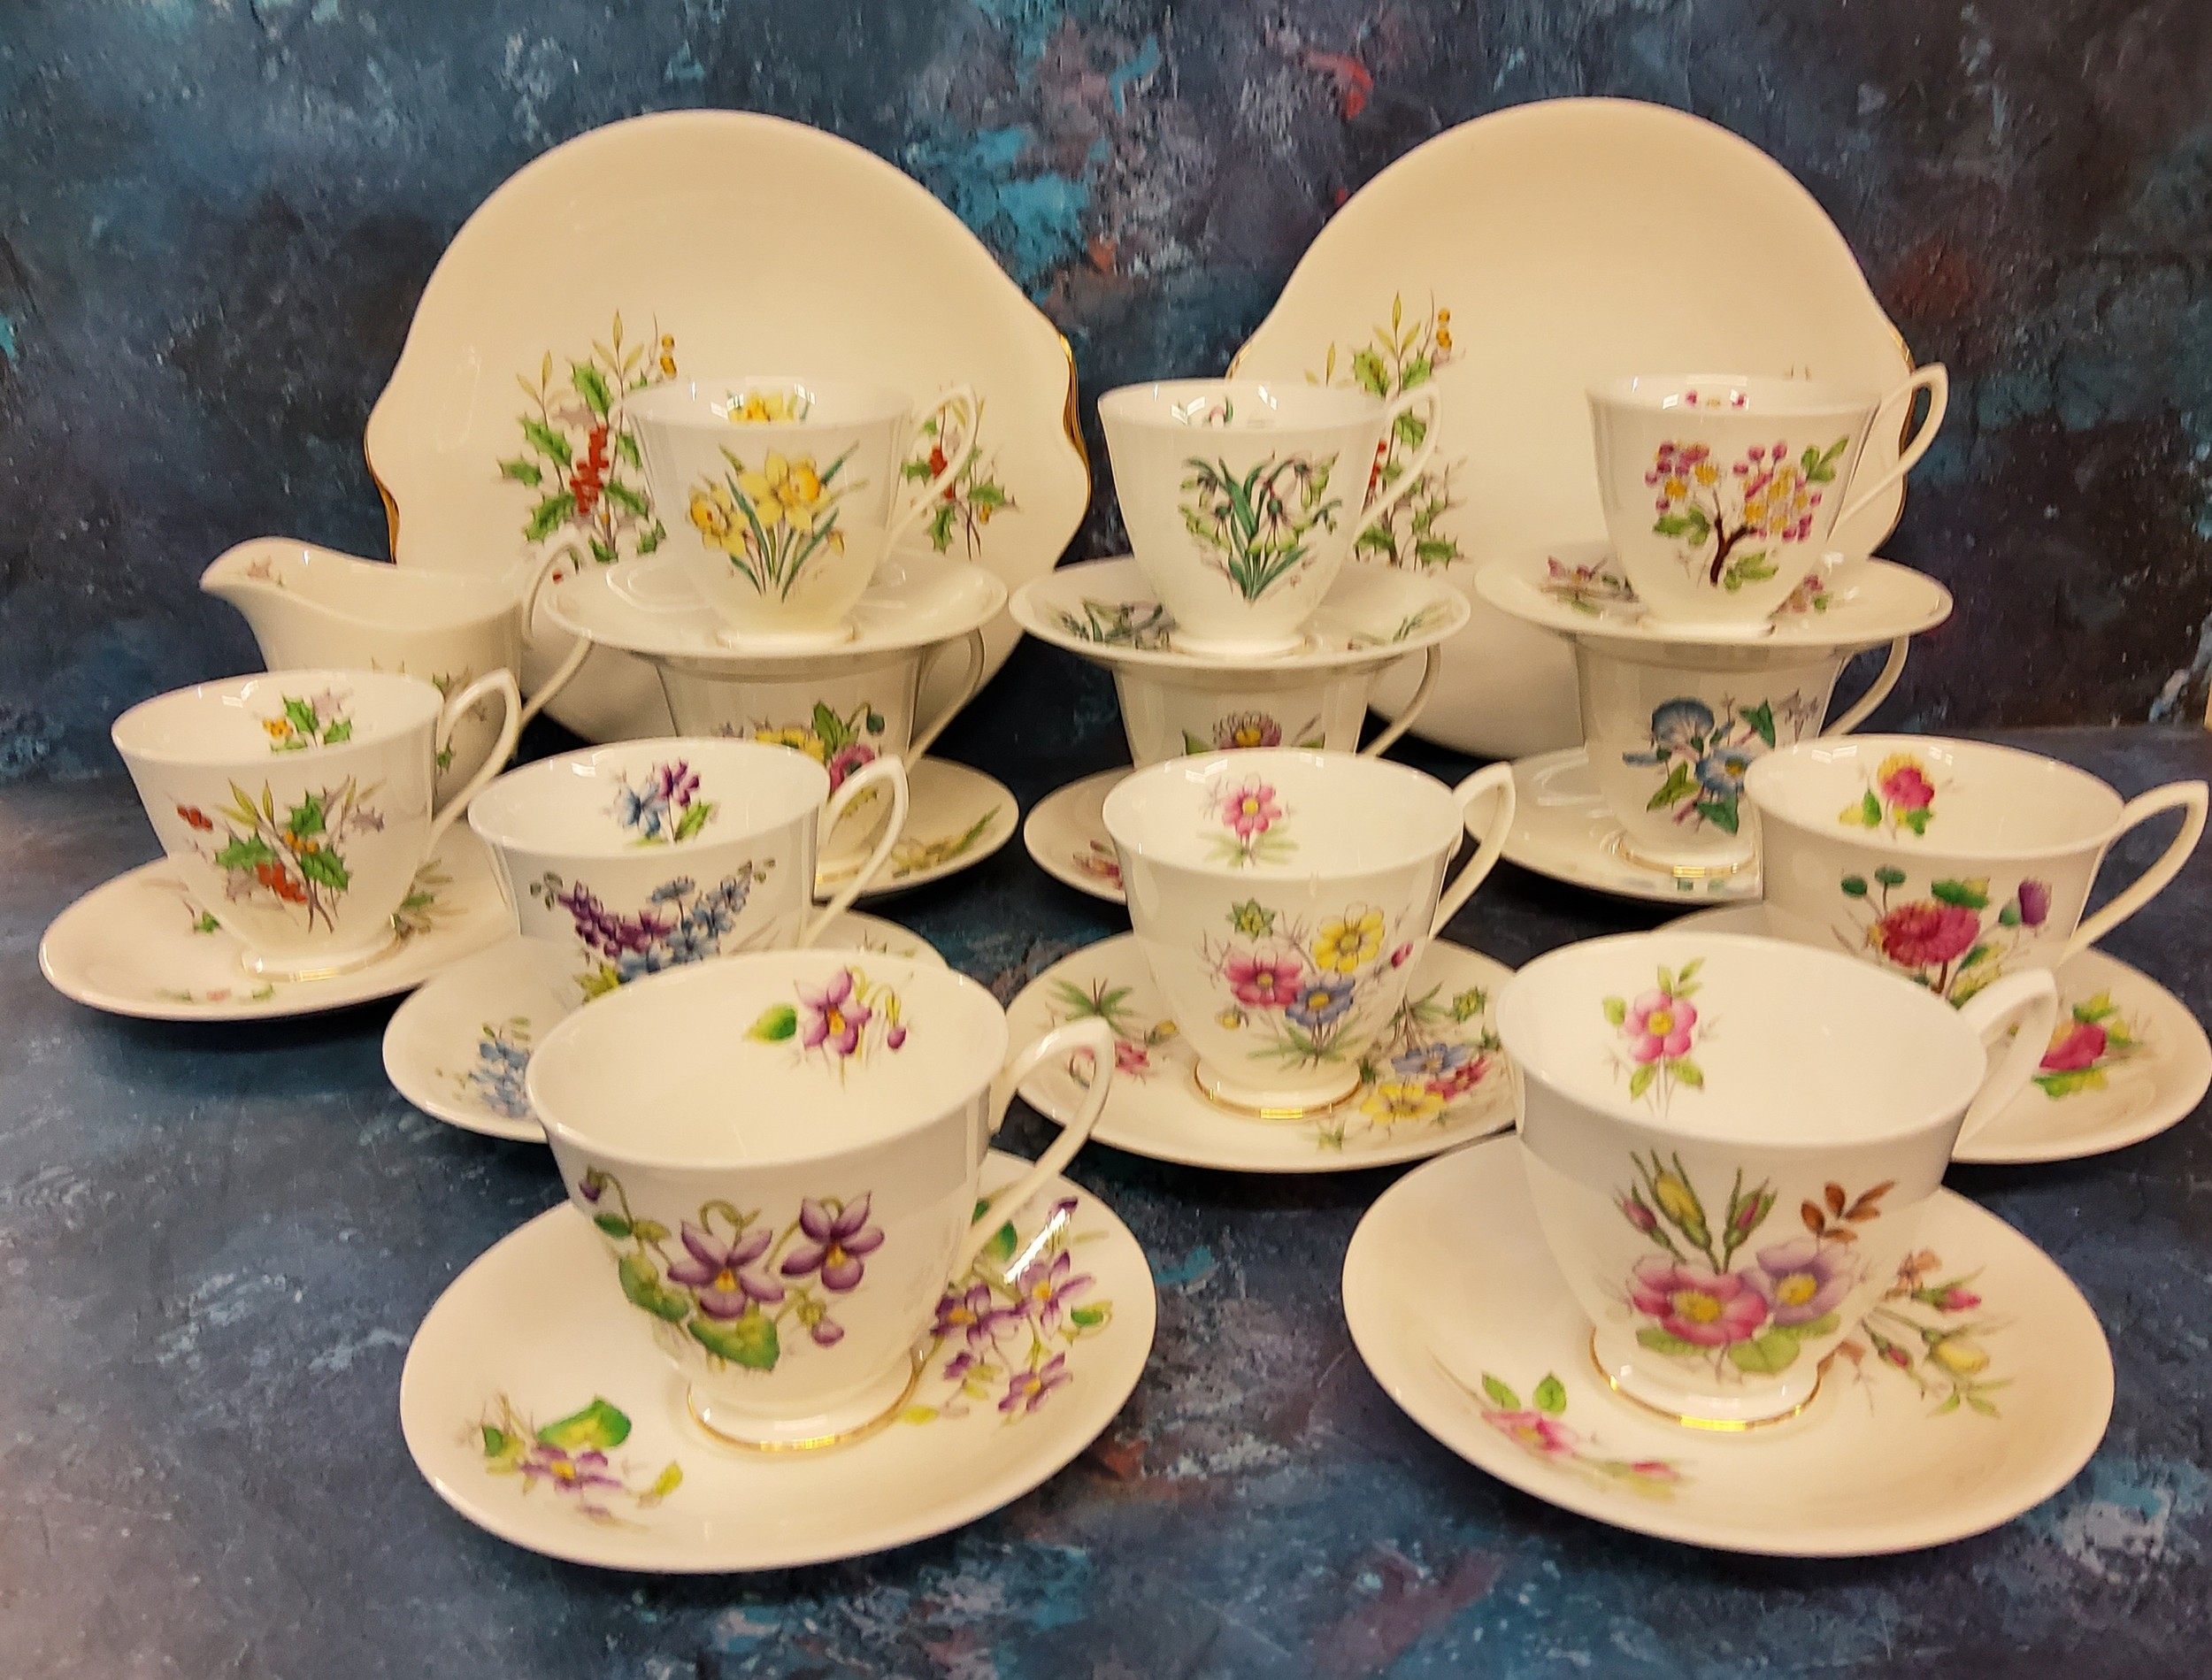 A Royal Albert Holly pattern teacup and saucer, milk jug and two bread and butter plates, printed